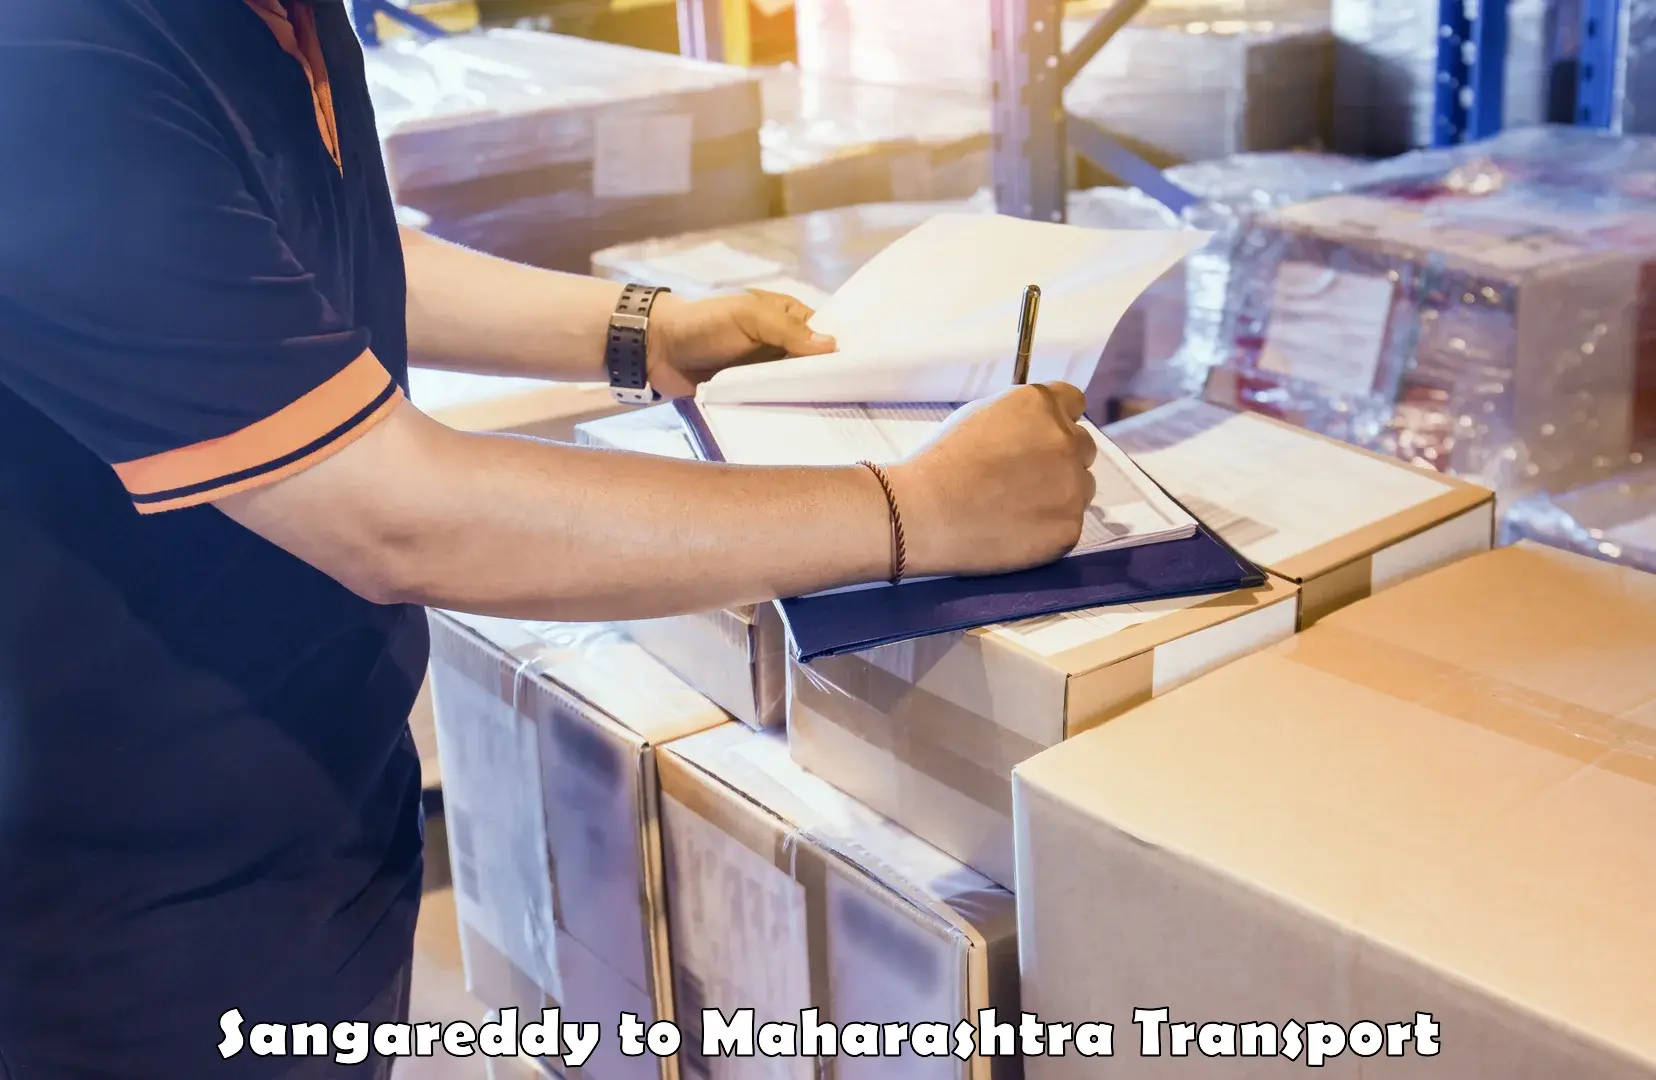 Air freight transport services in Sangareddy to Pimpri Chinchwad